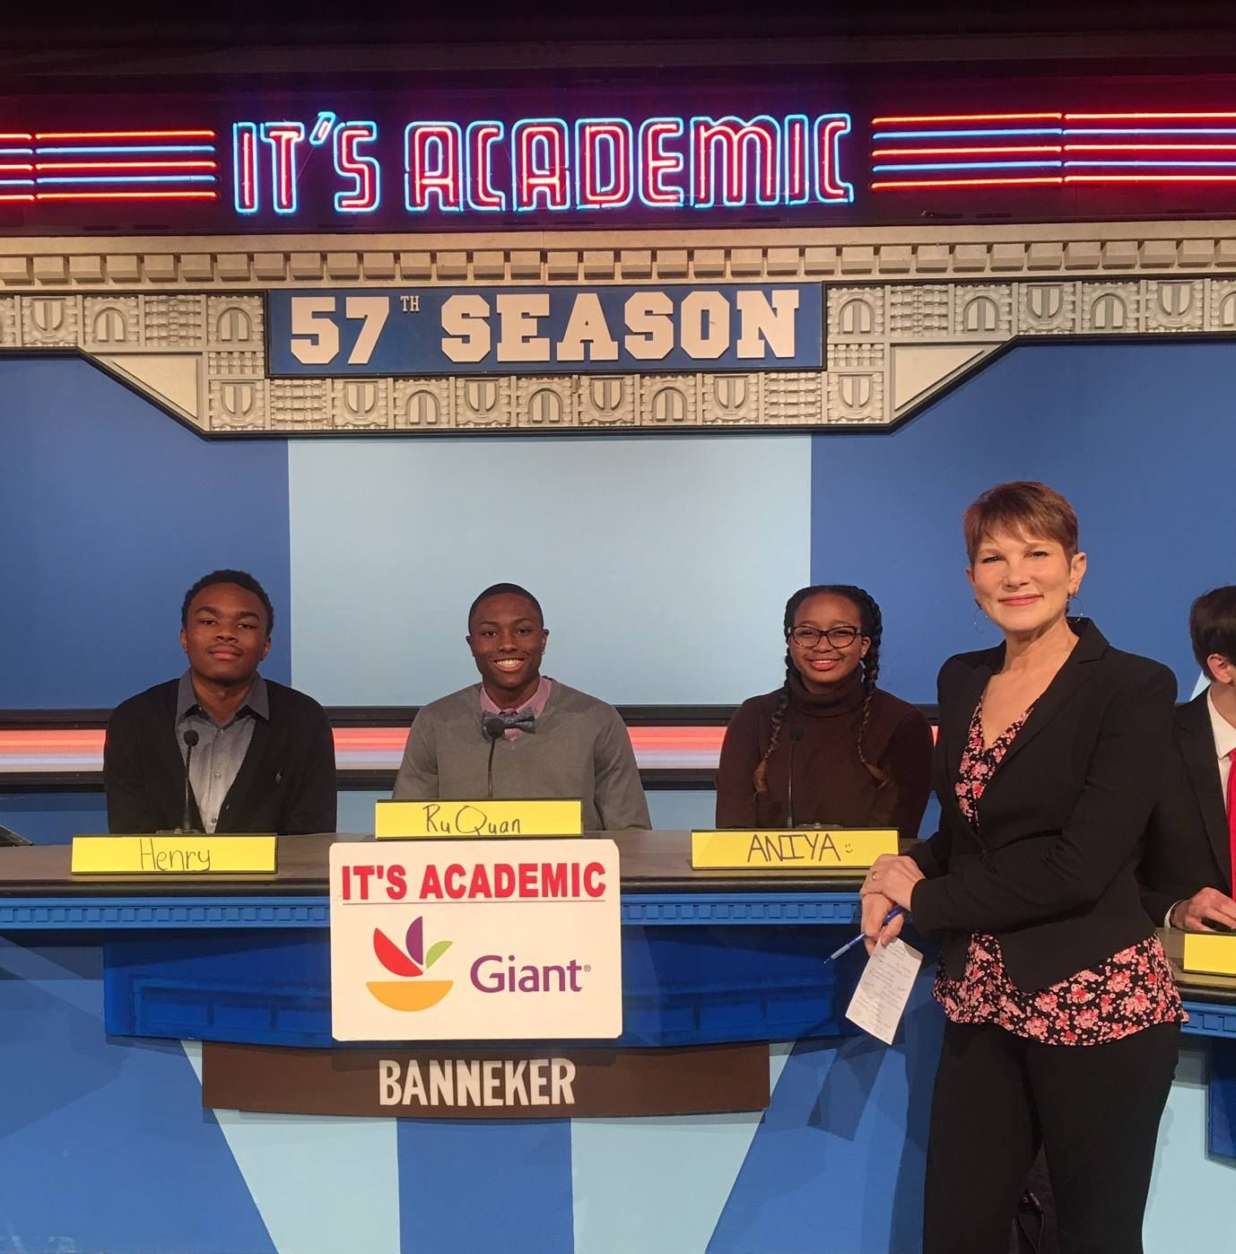 On "It's Academic," Banneker High School competed against Lake Braddock and St. John's. The show aired Feb. 24, 2018. (Courtesy Facebook/It's Academic)